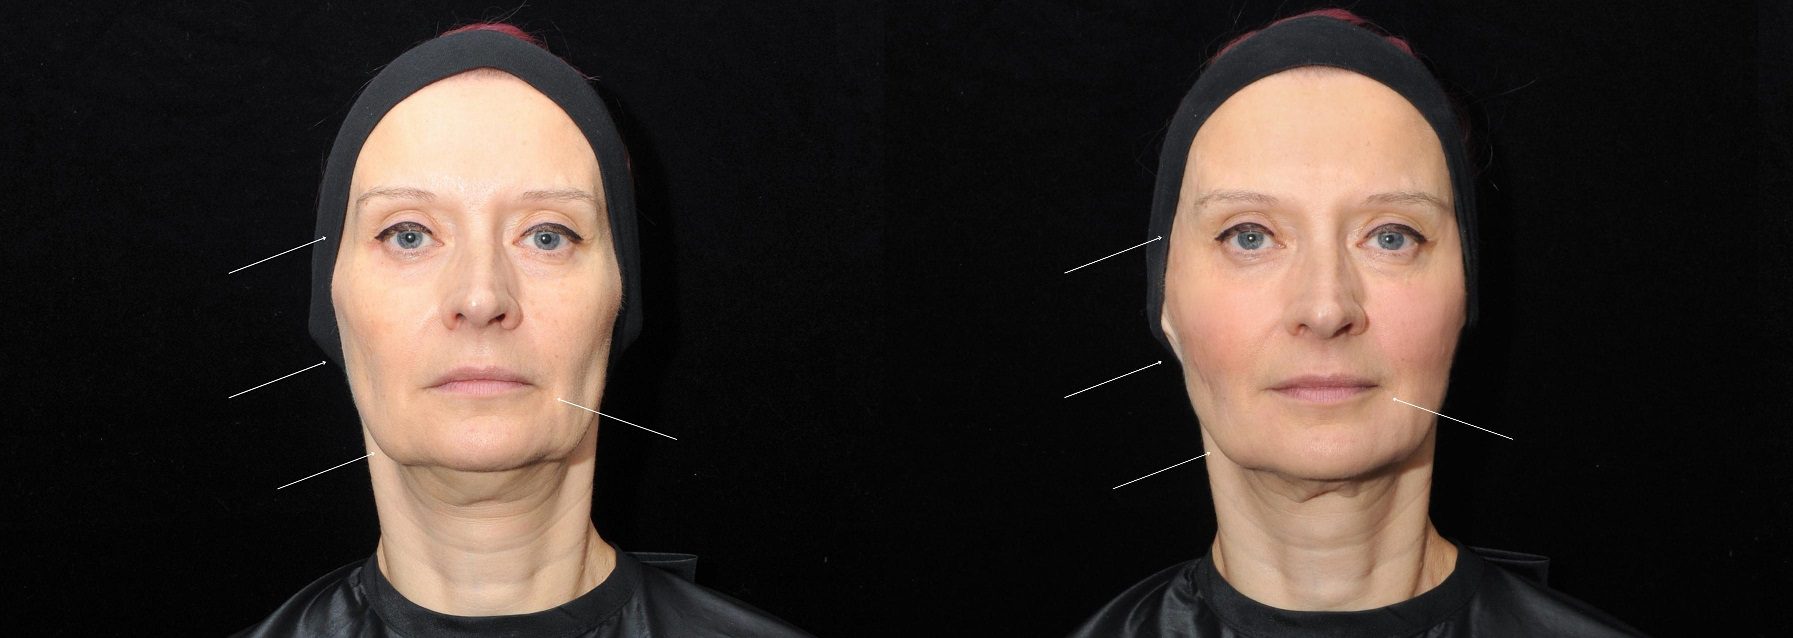 jawline contouring with fillers before and after